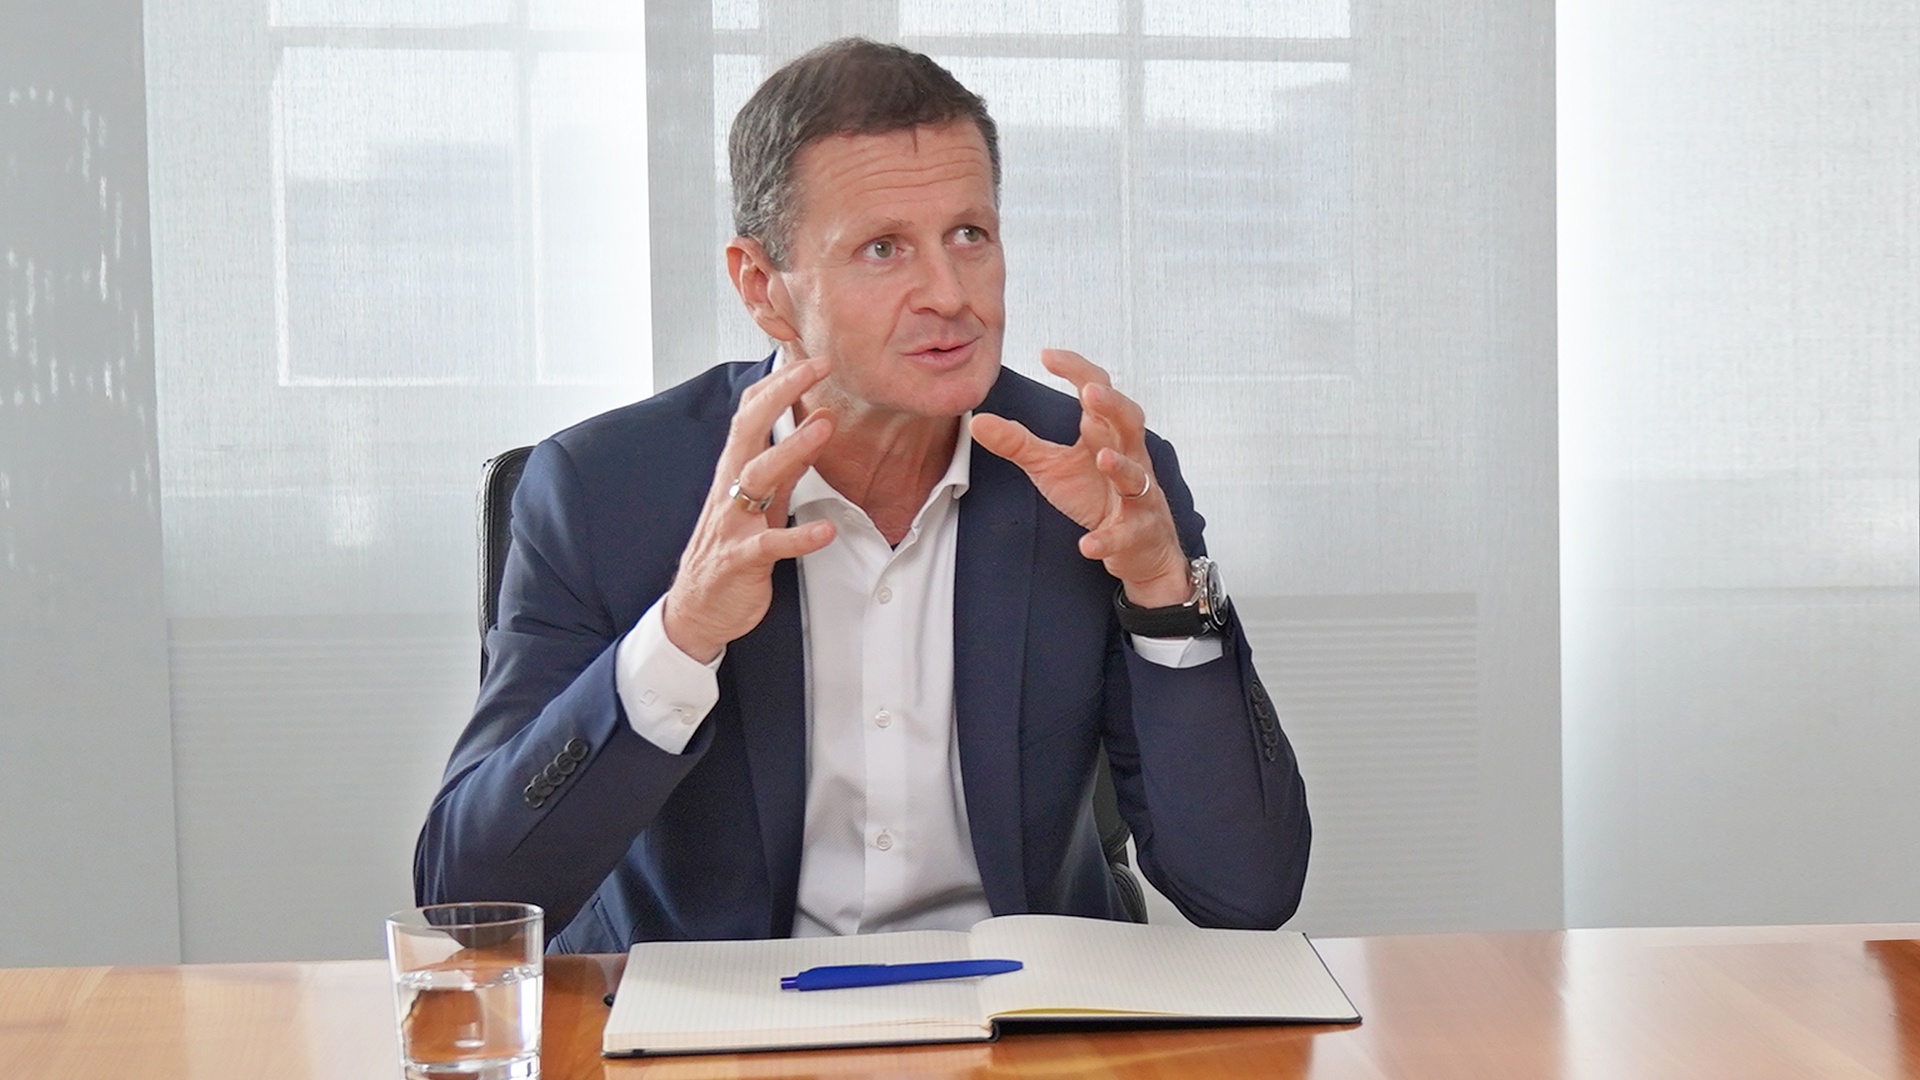 Frank Markus Weber, CFO of Knorr-Bremse AG, sits gesticulating at a conference table and gives an interview.